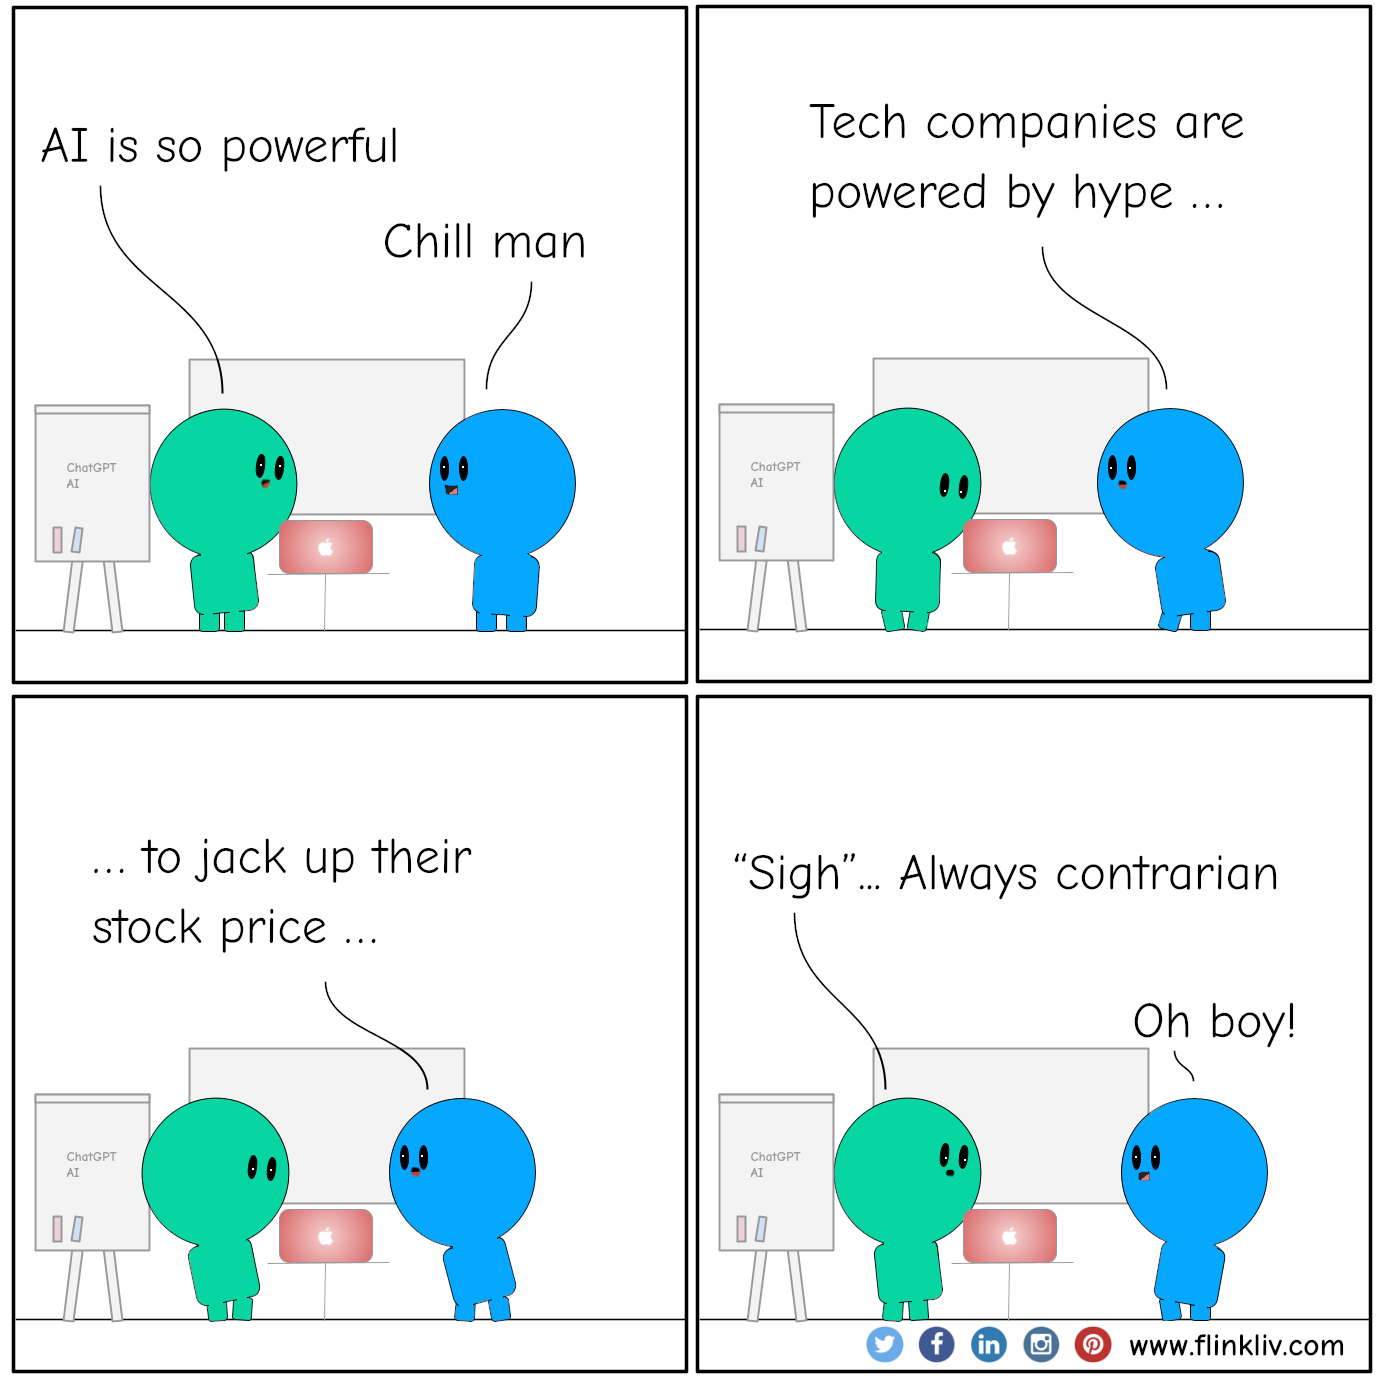 Conversation between A and B about Emotional Appeal fallacy using hype A: AI is so powerful B: Chill man B: Tech companies are powered by hype, to jack up their stock price A: “Sigh” Always contrarian B: Oh! boy. By flinkliv.com